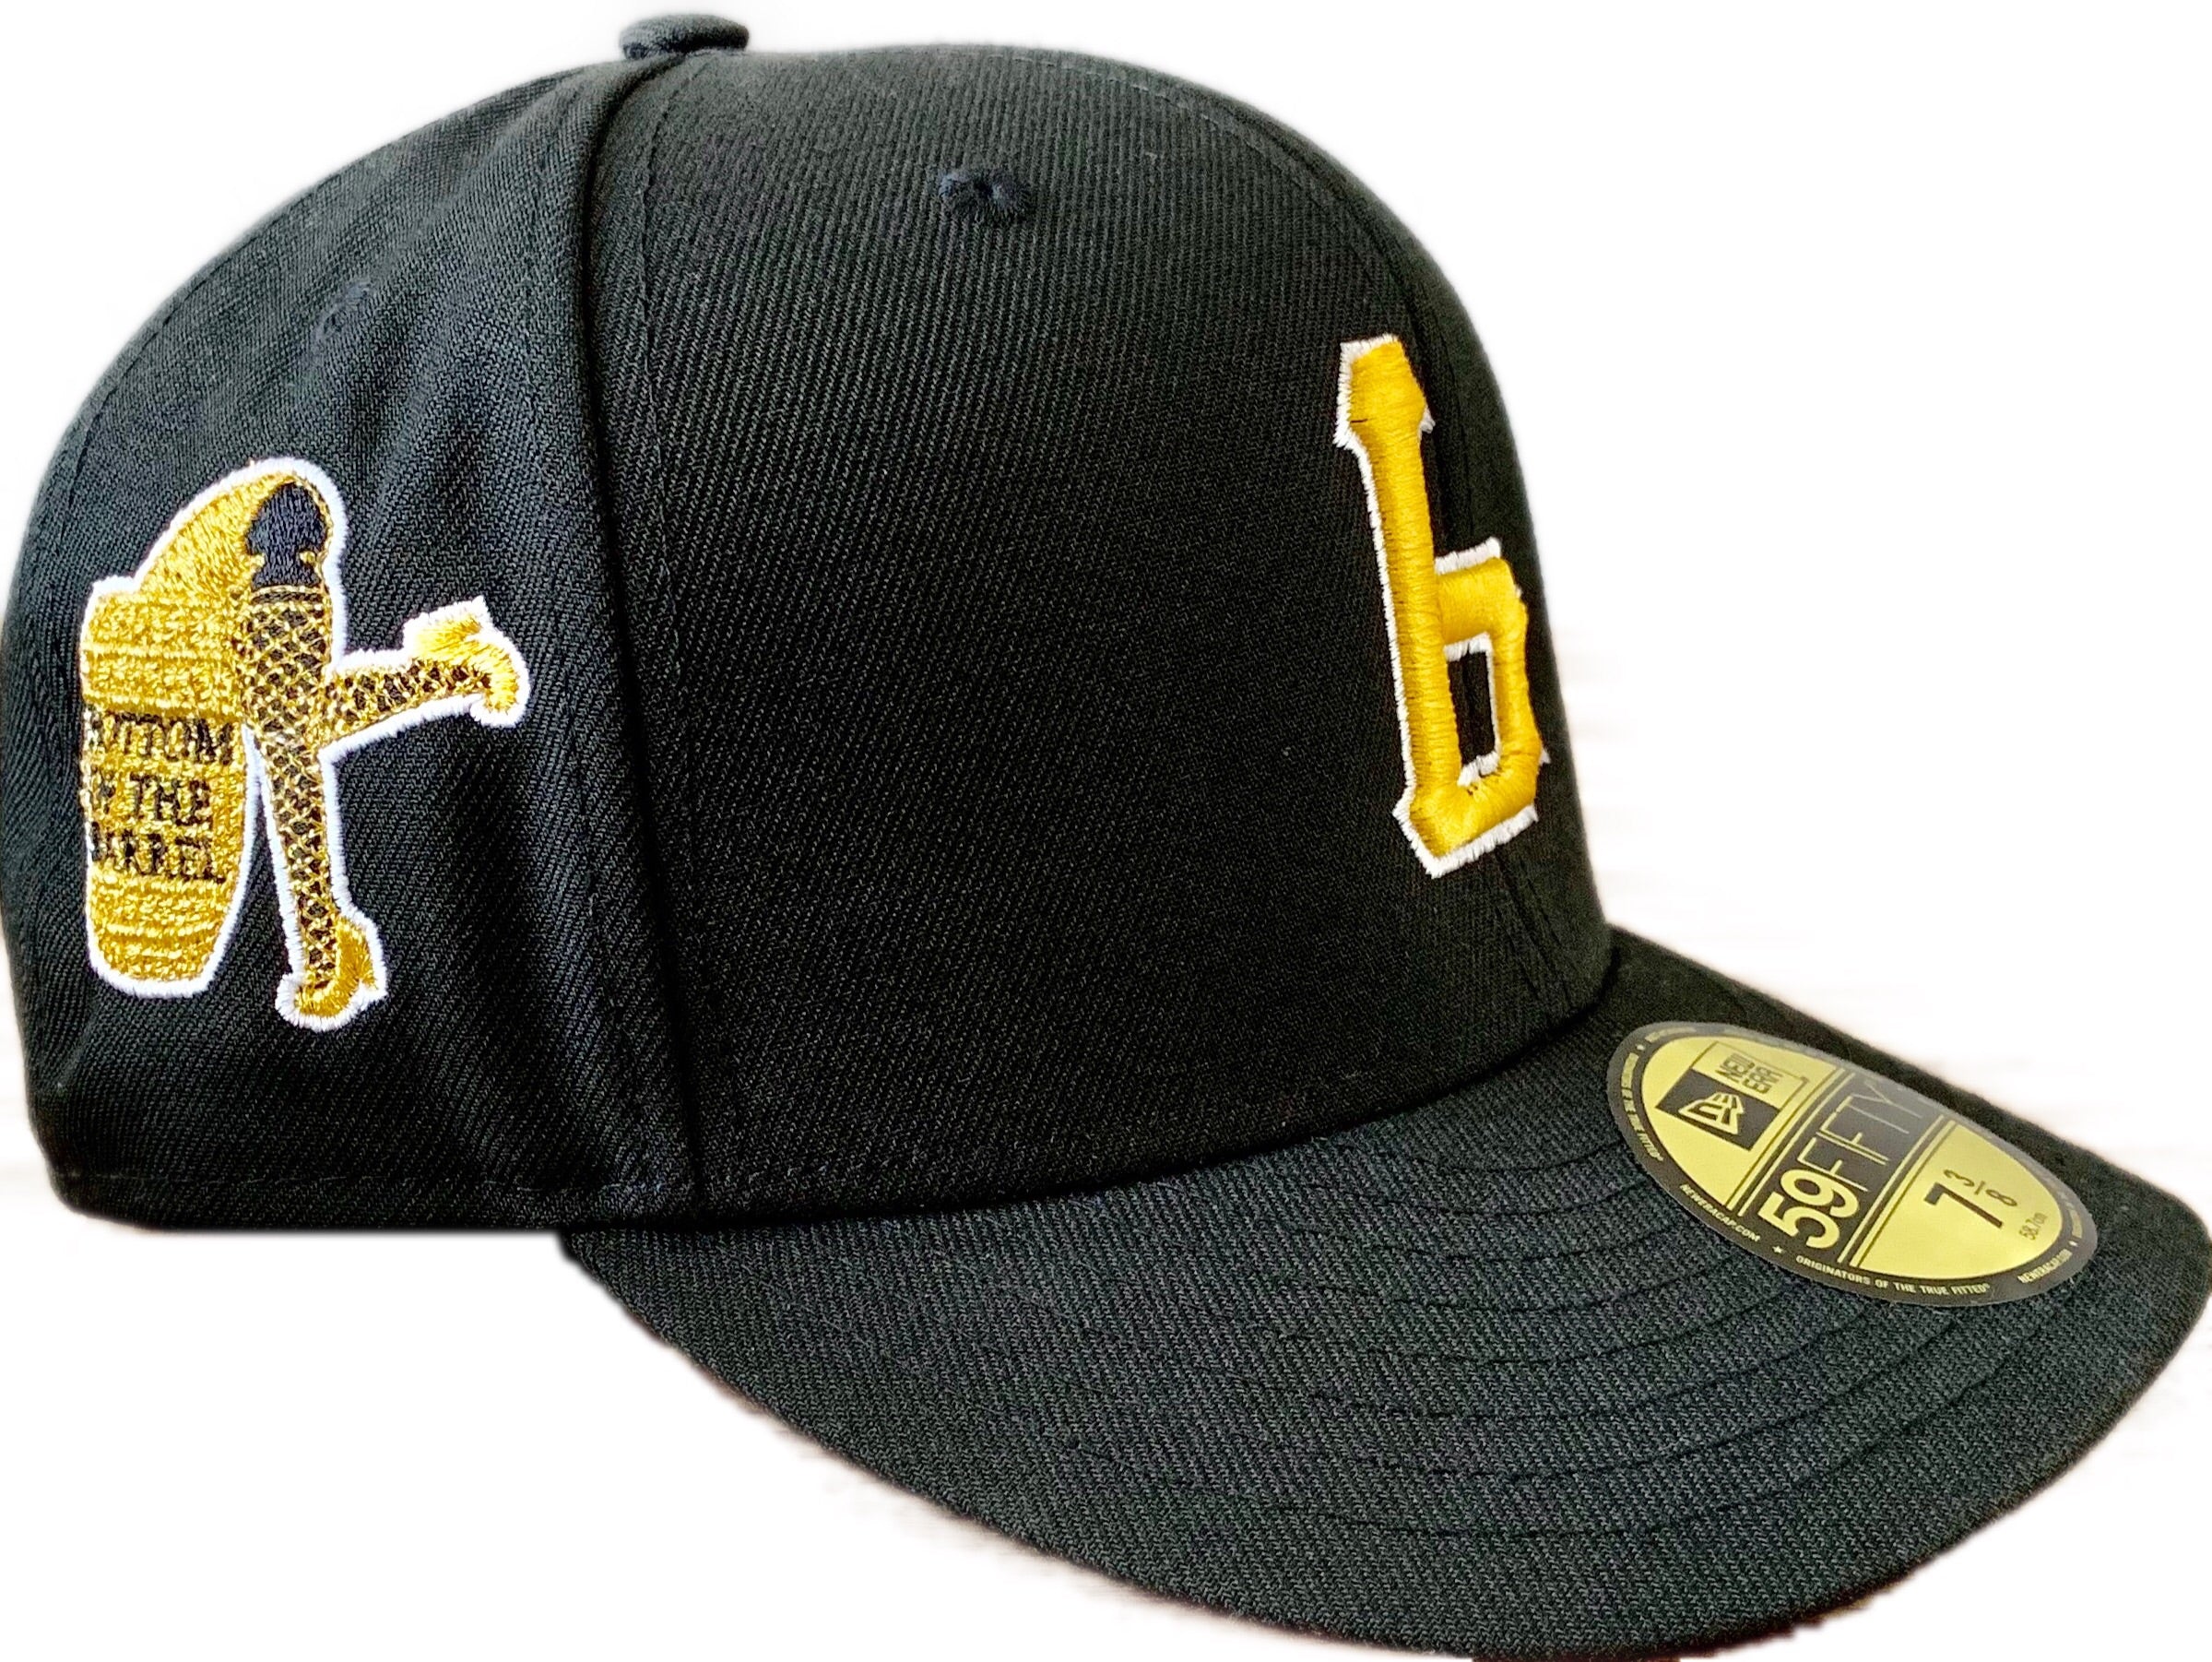 Limited Edition New Era Black Yellow Fitted Cap